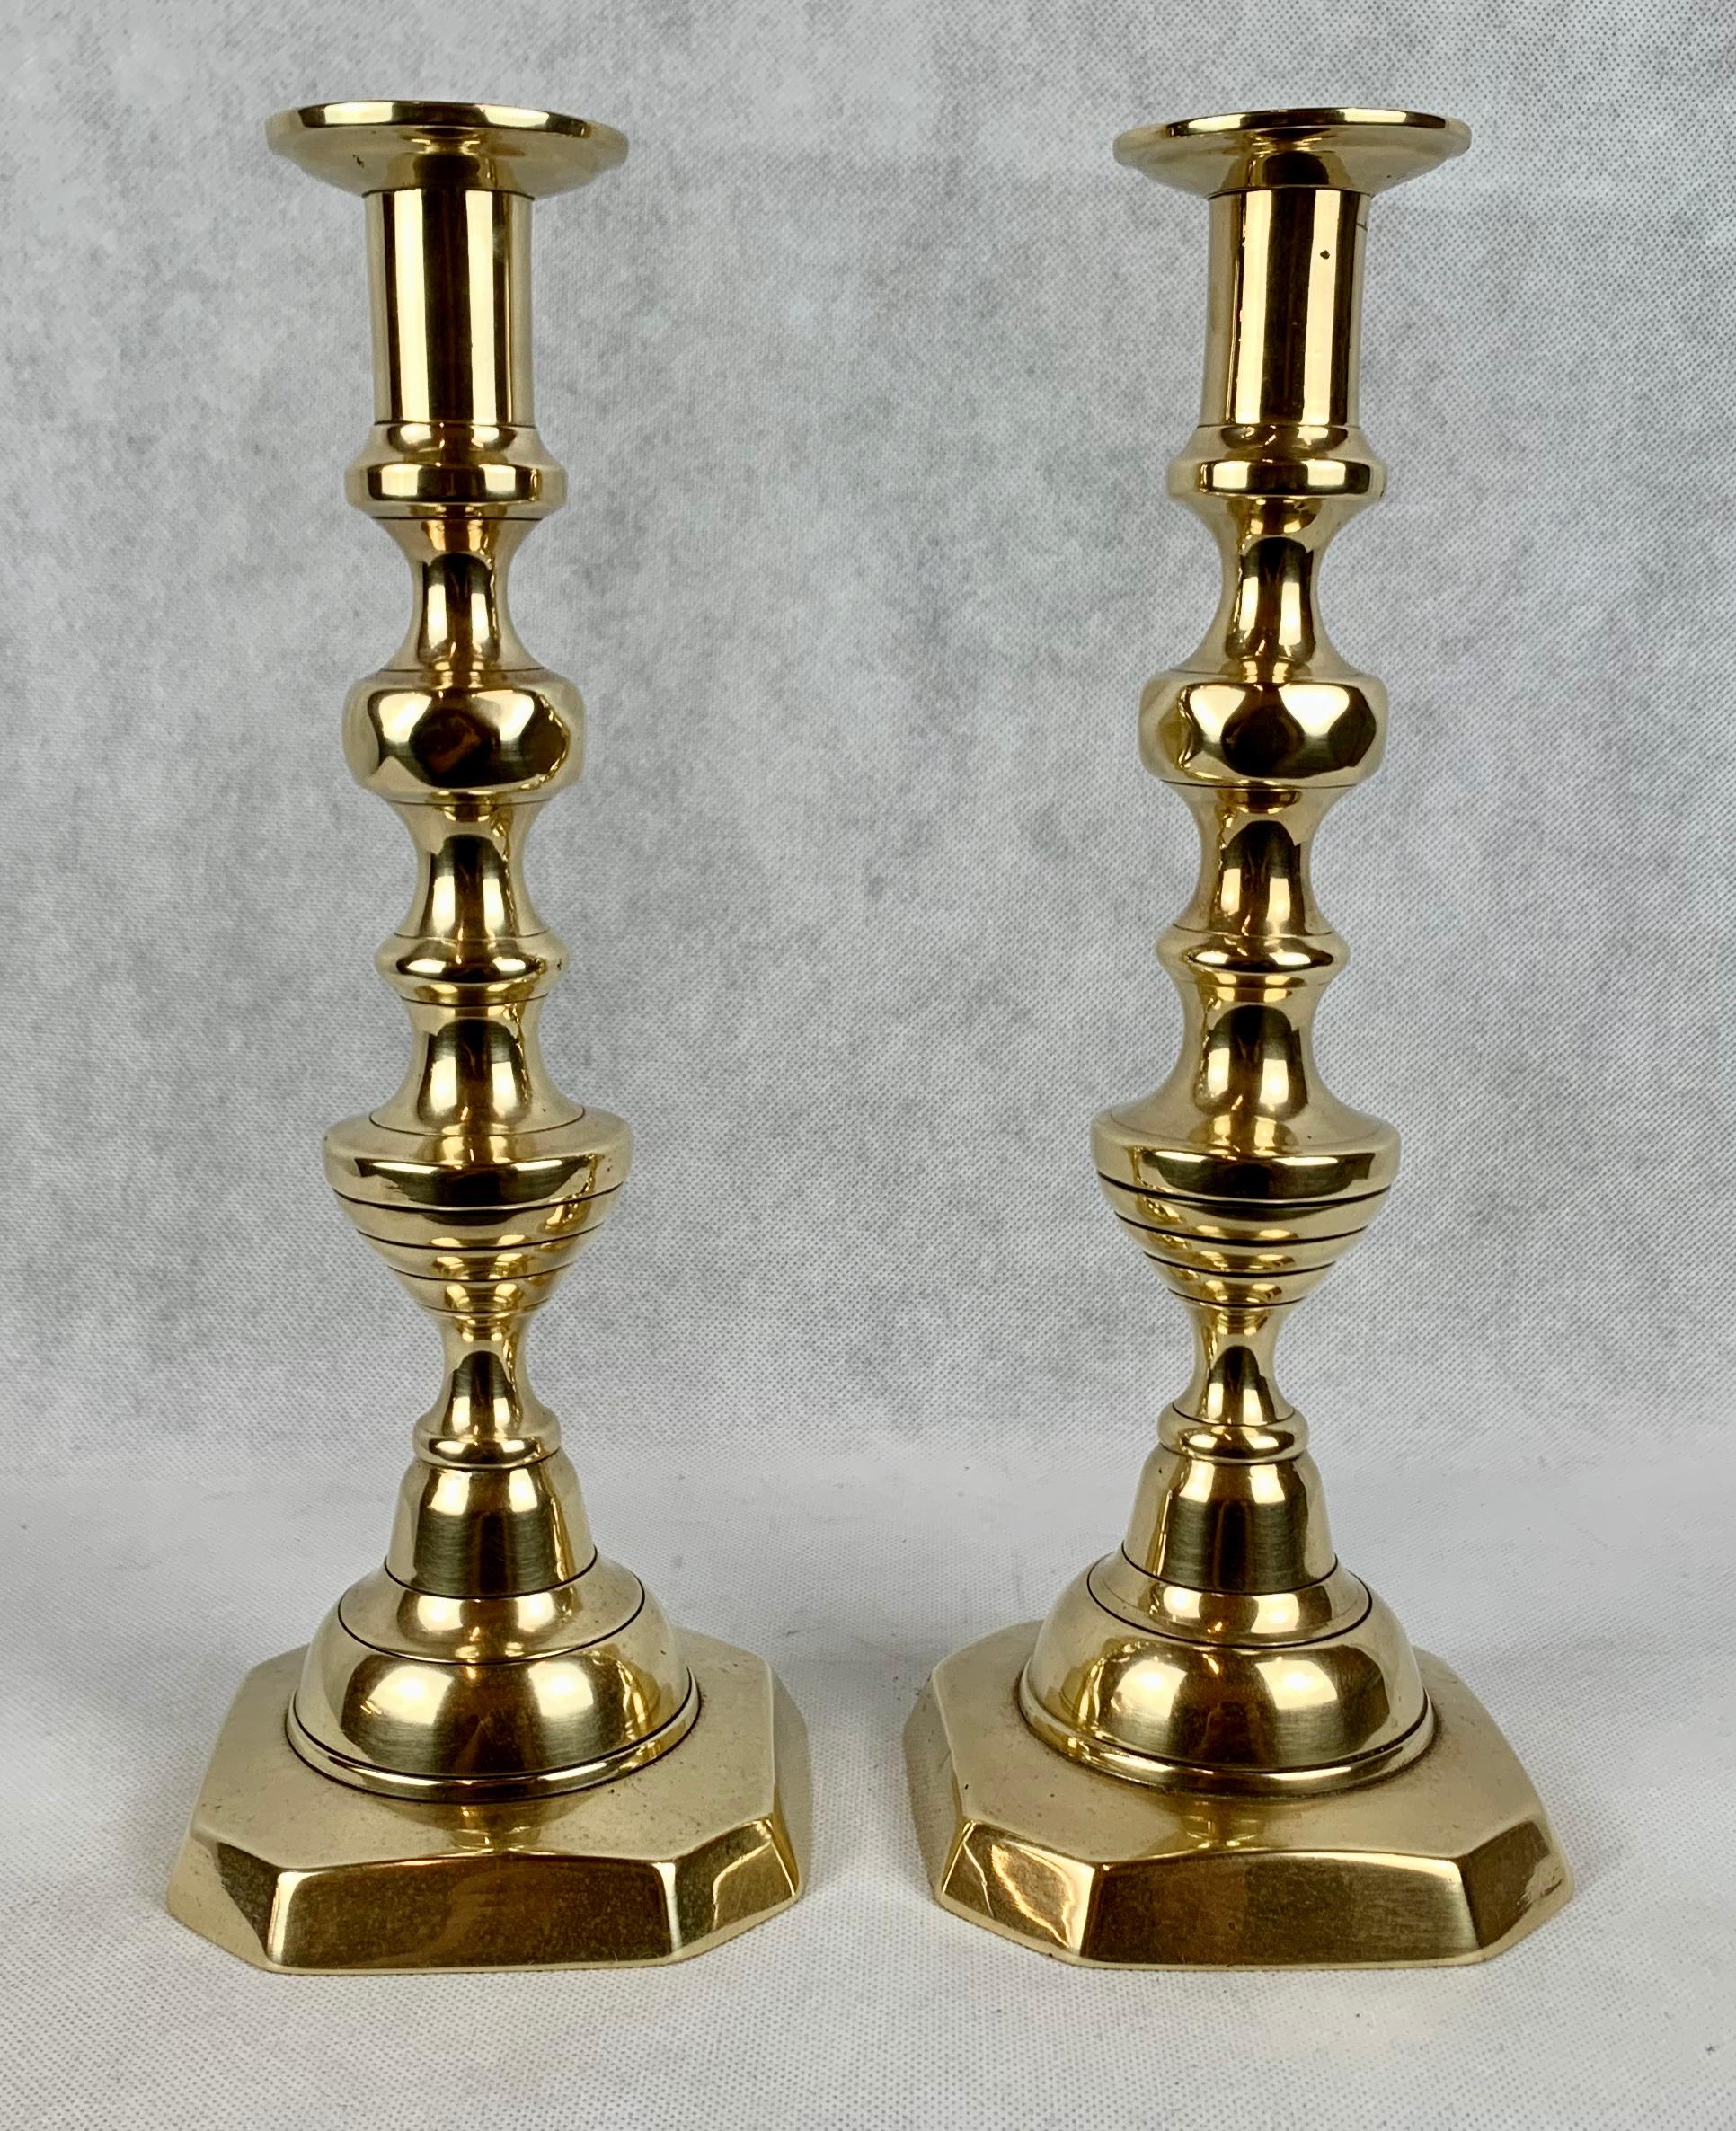 English A Pair of Diamond and Beehive Push-Up Brass Candlesticks, 12